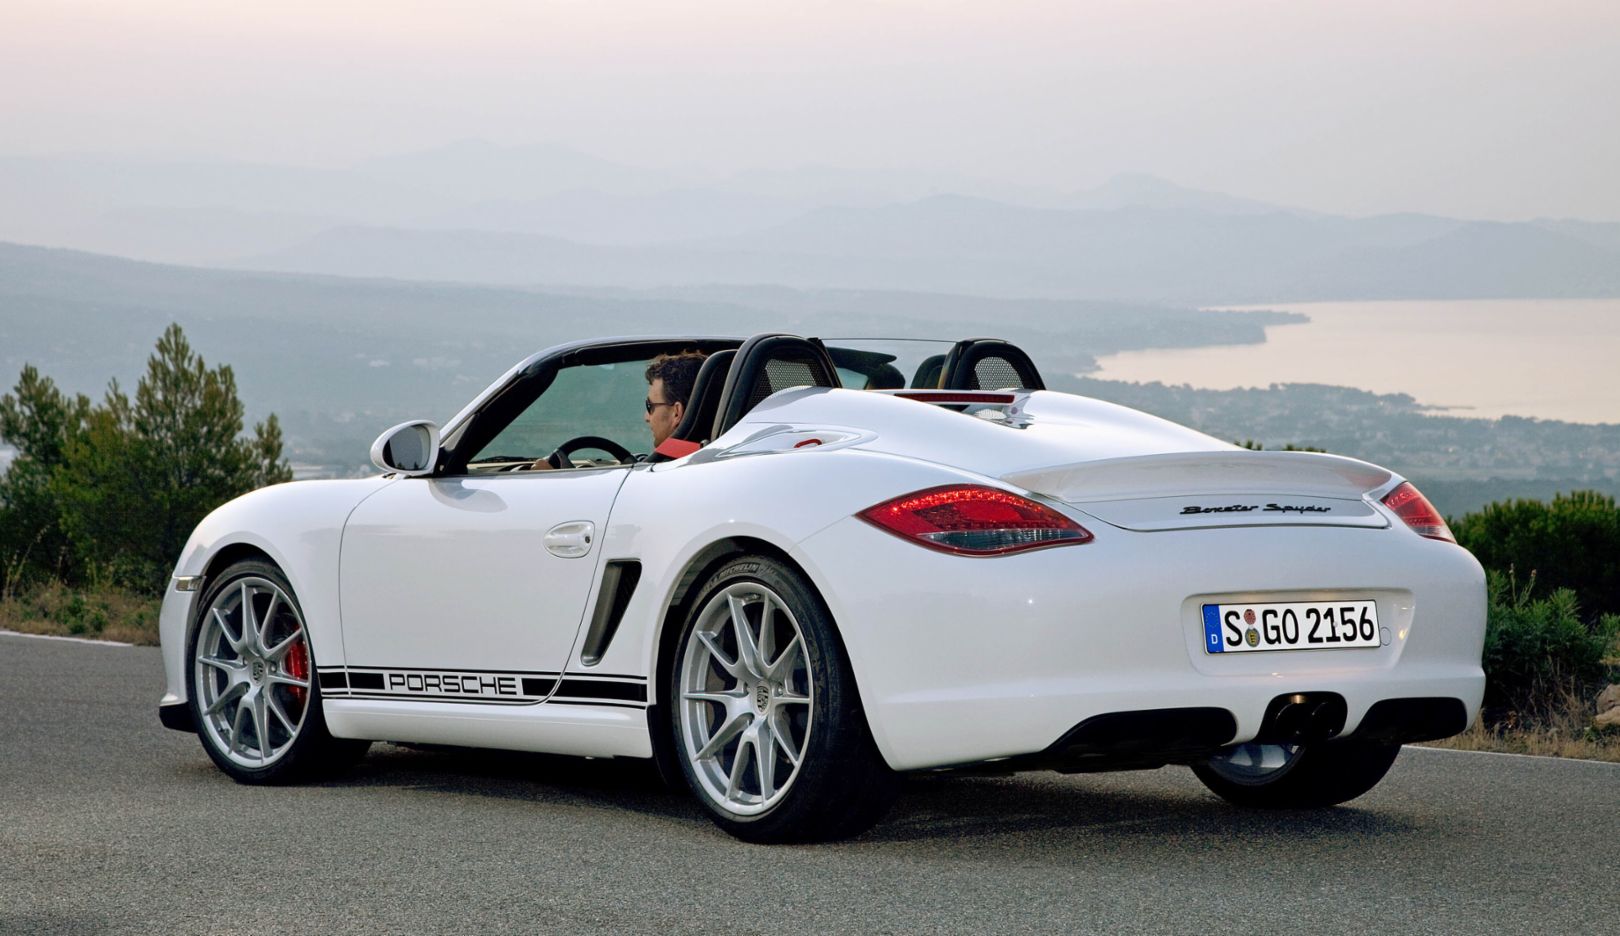 987 generation: Boxster Spyder special edition (2010). The Boxster Spyder becomes known as Porsche's lightest street-legal sports car when it is presented in 2009. It weighs eighty kilograms less than the Boxster S and produces over 10 PS more power.